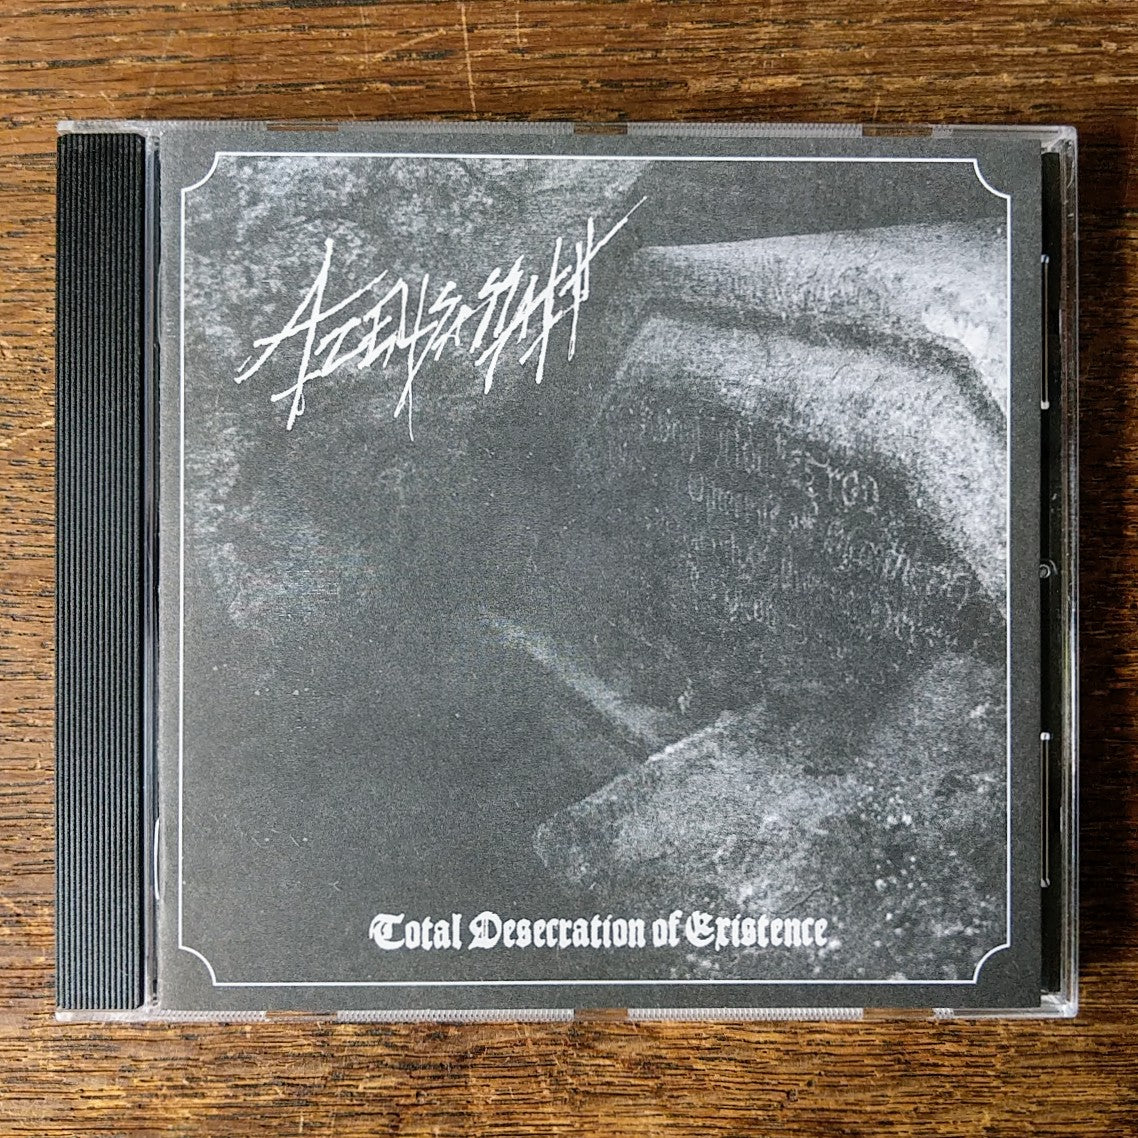 [SOLD OUT] AZELISASSATH "Total Desecration of Existence" CD